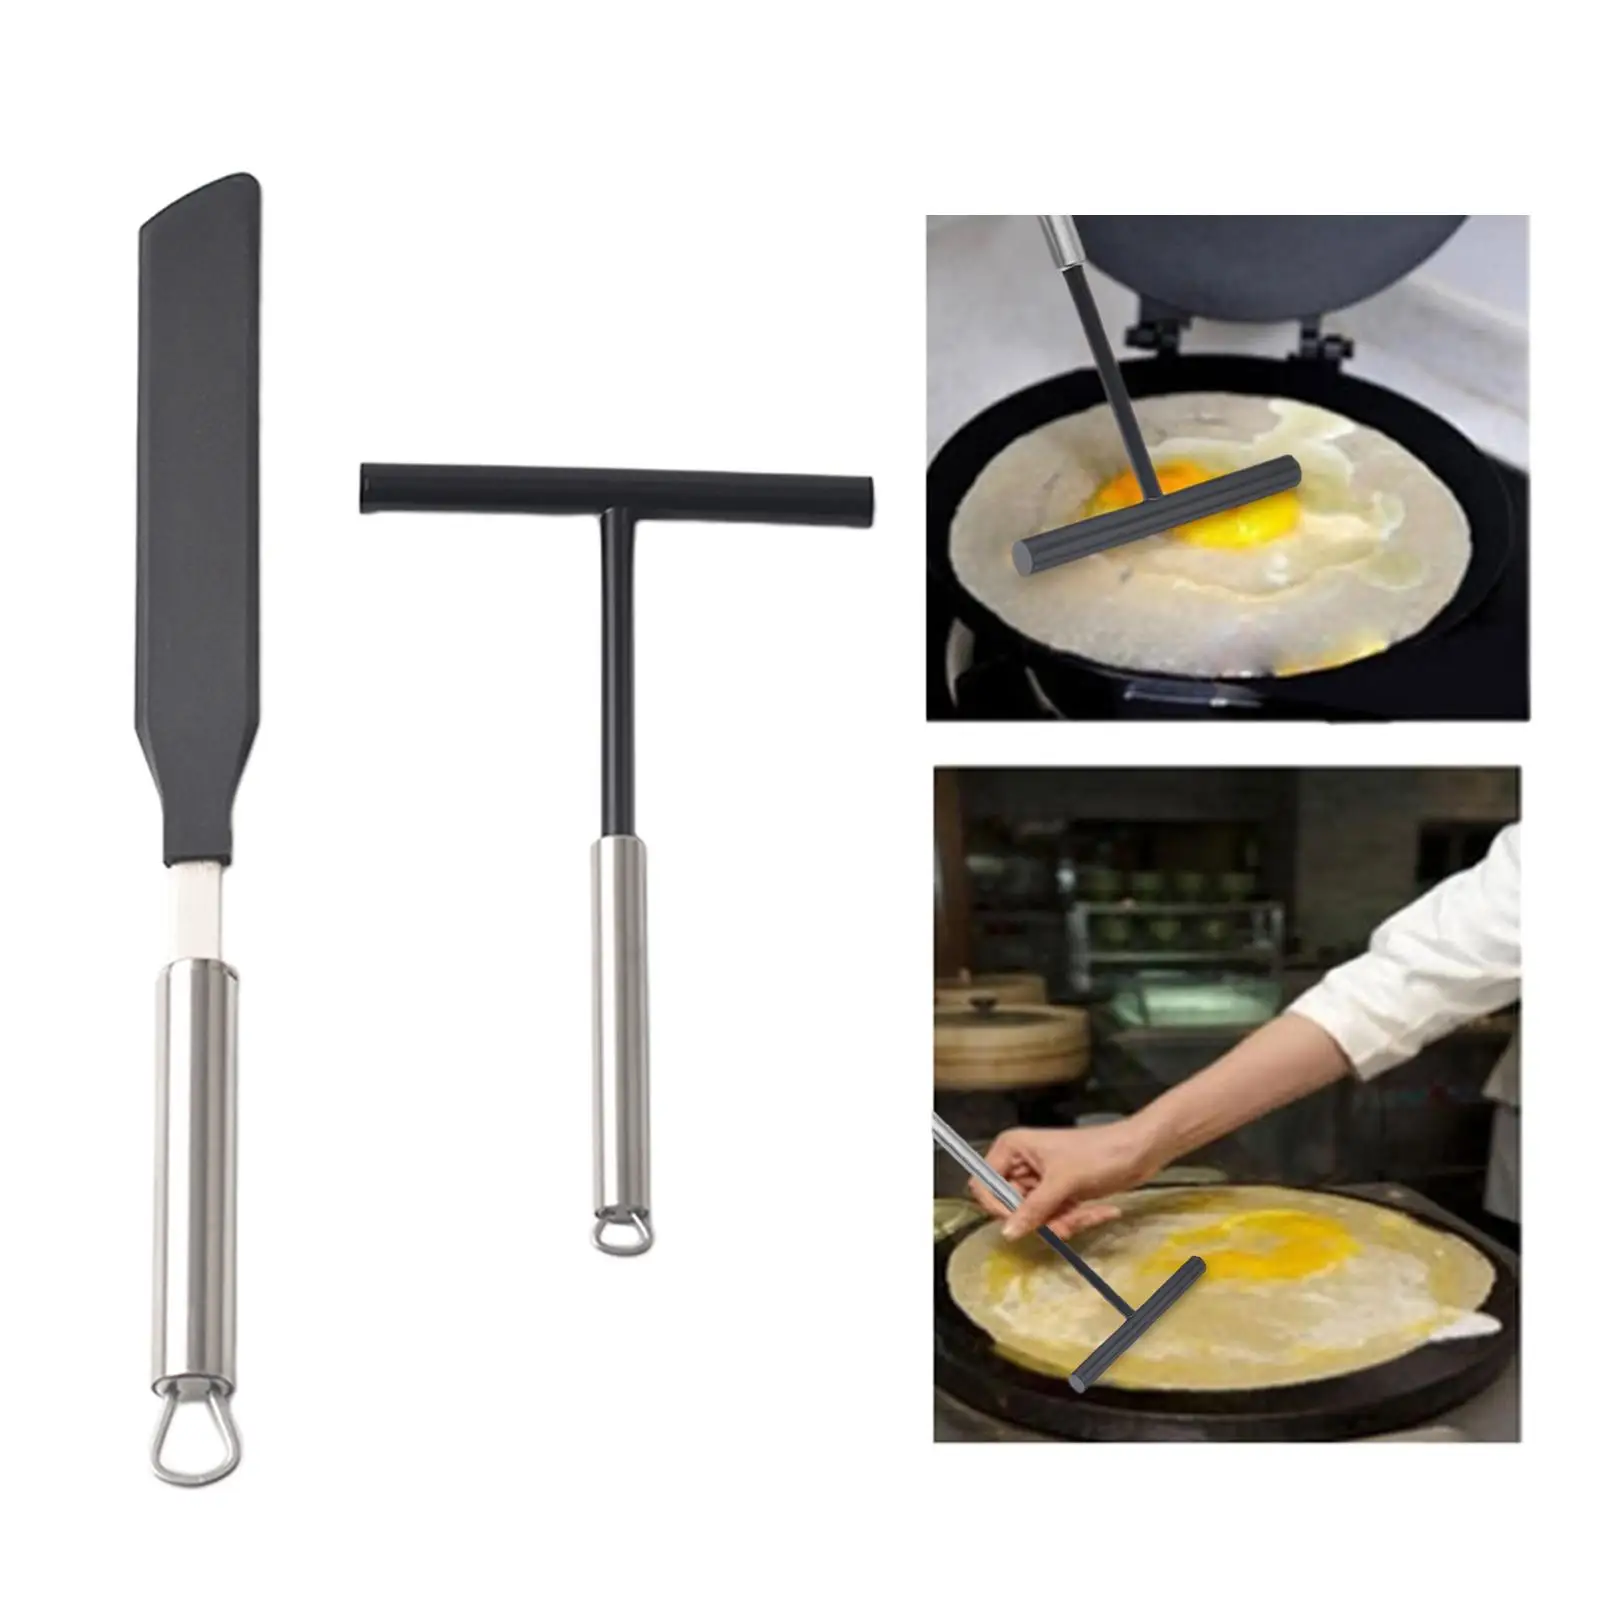 2Pcs Crepe Spreader and Spatula Set Kitchen Gadgets Pancake Cooking Tools T Shaped Pastry Tool Cookware for Restaurant Kitchen